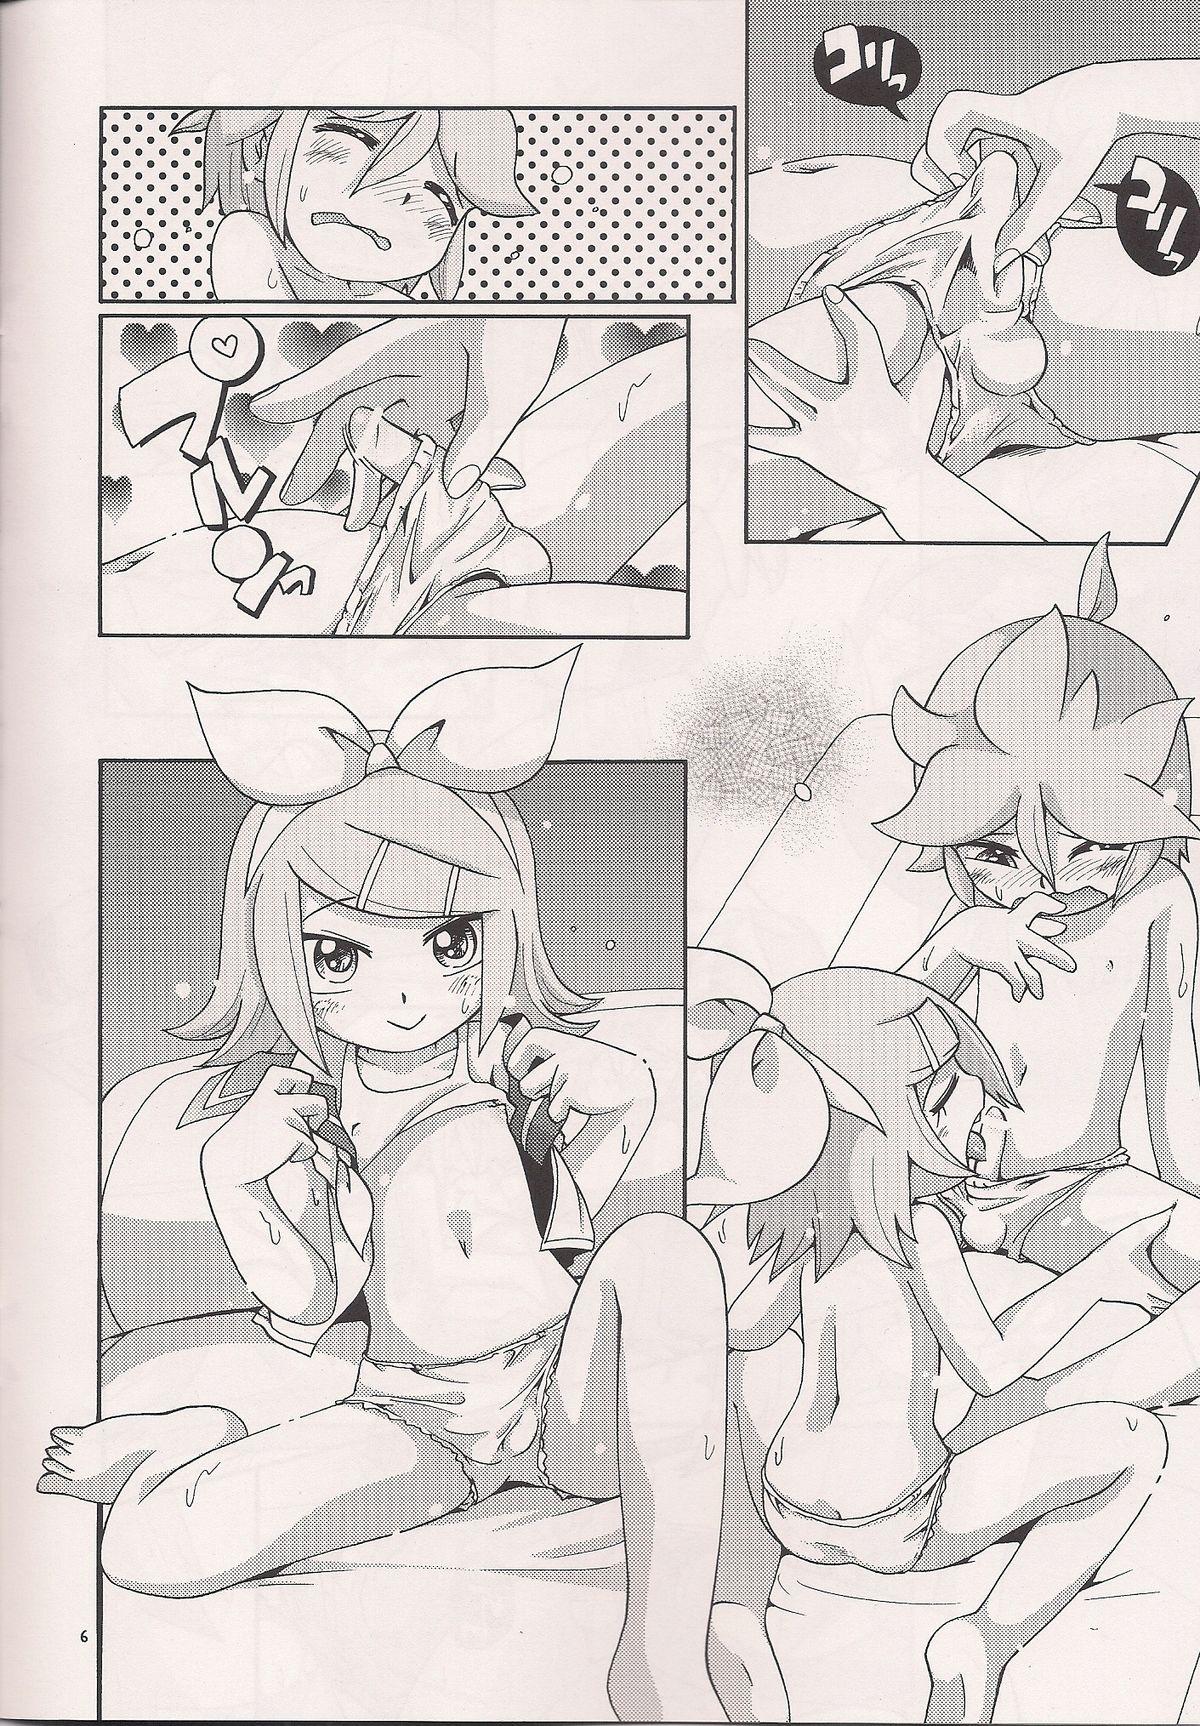 Groping Princess Song - Hime Uta - Vocaloid Mulher - Page 5